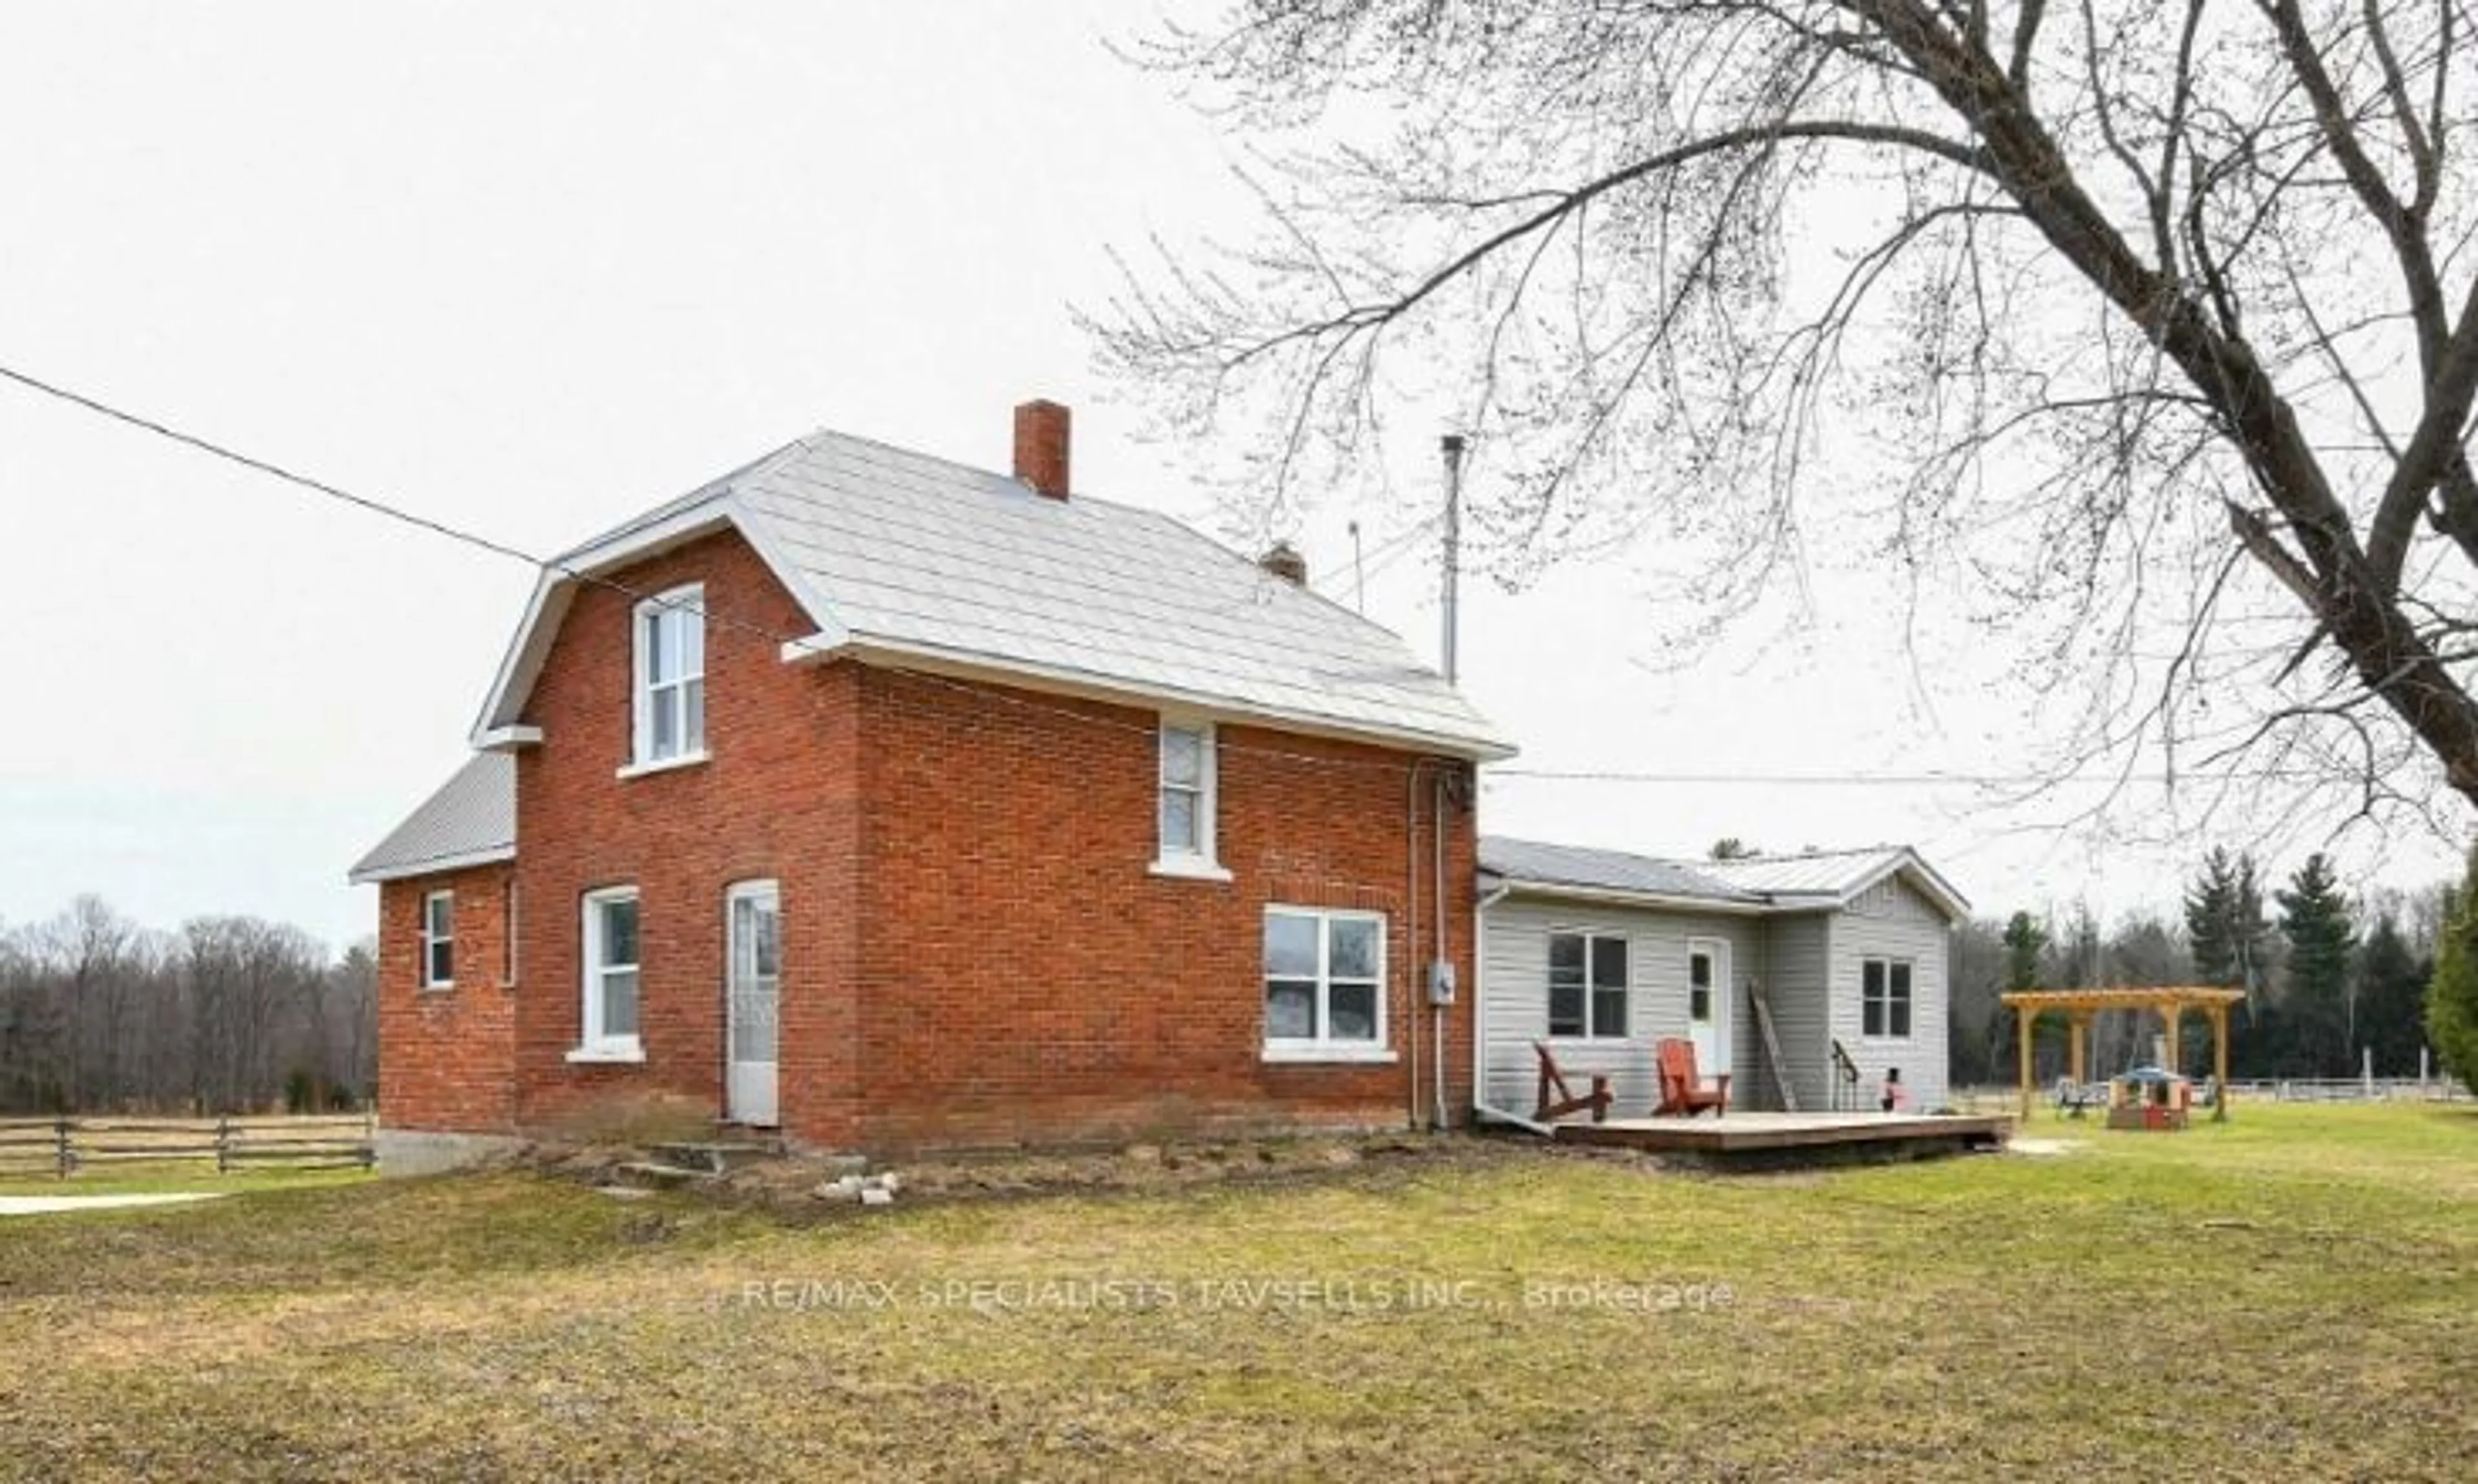 Home with brick exterior material for 5343 Sunnidale Concession 3, Clearview Ontario L0M 1N0